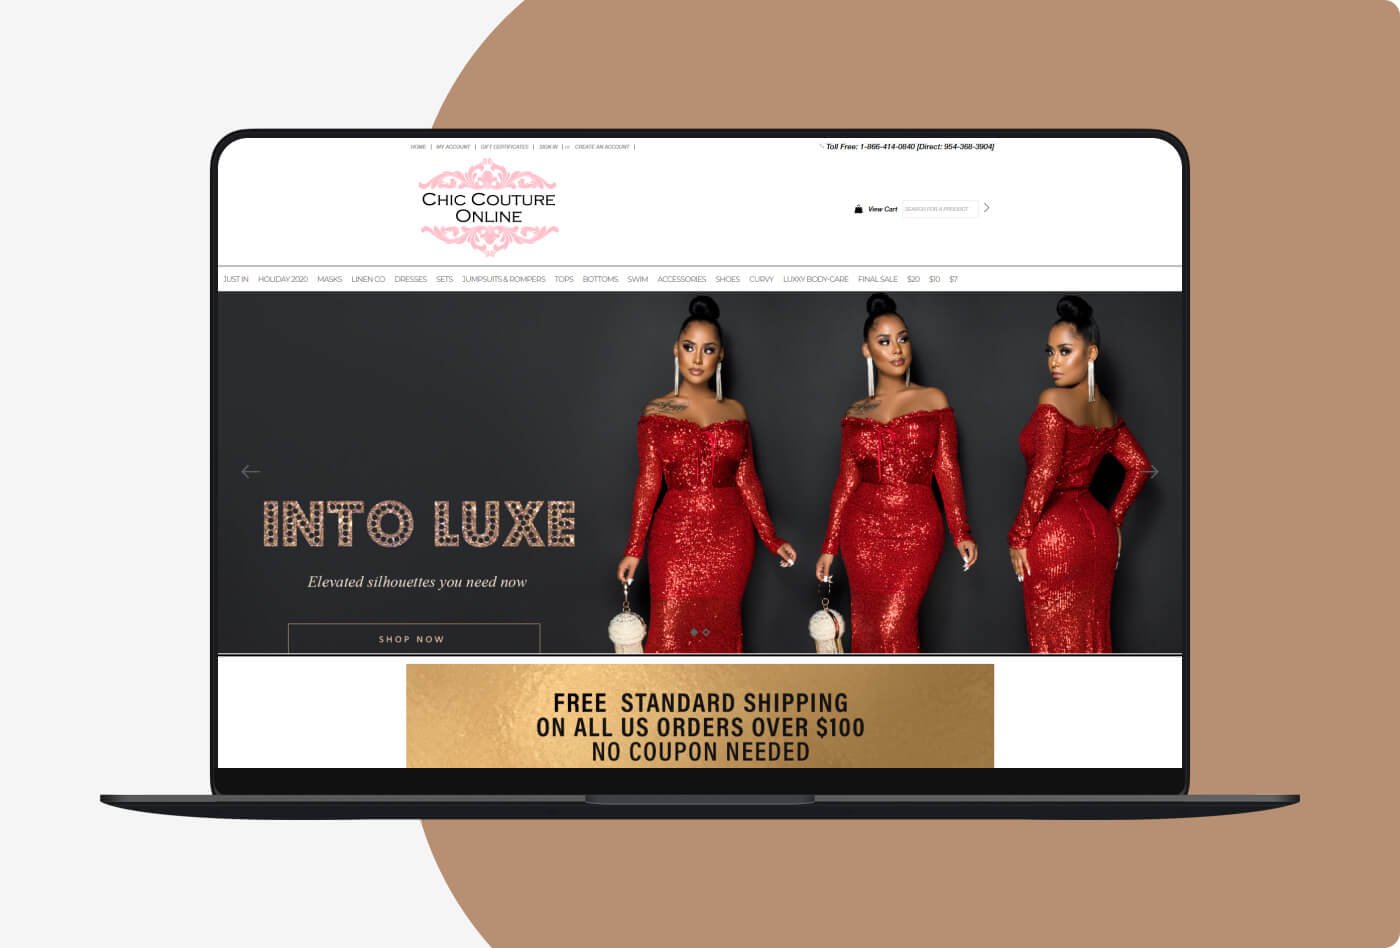 Chic Couture Online